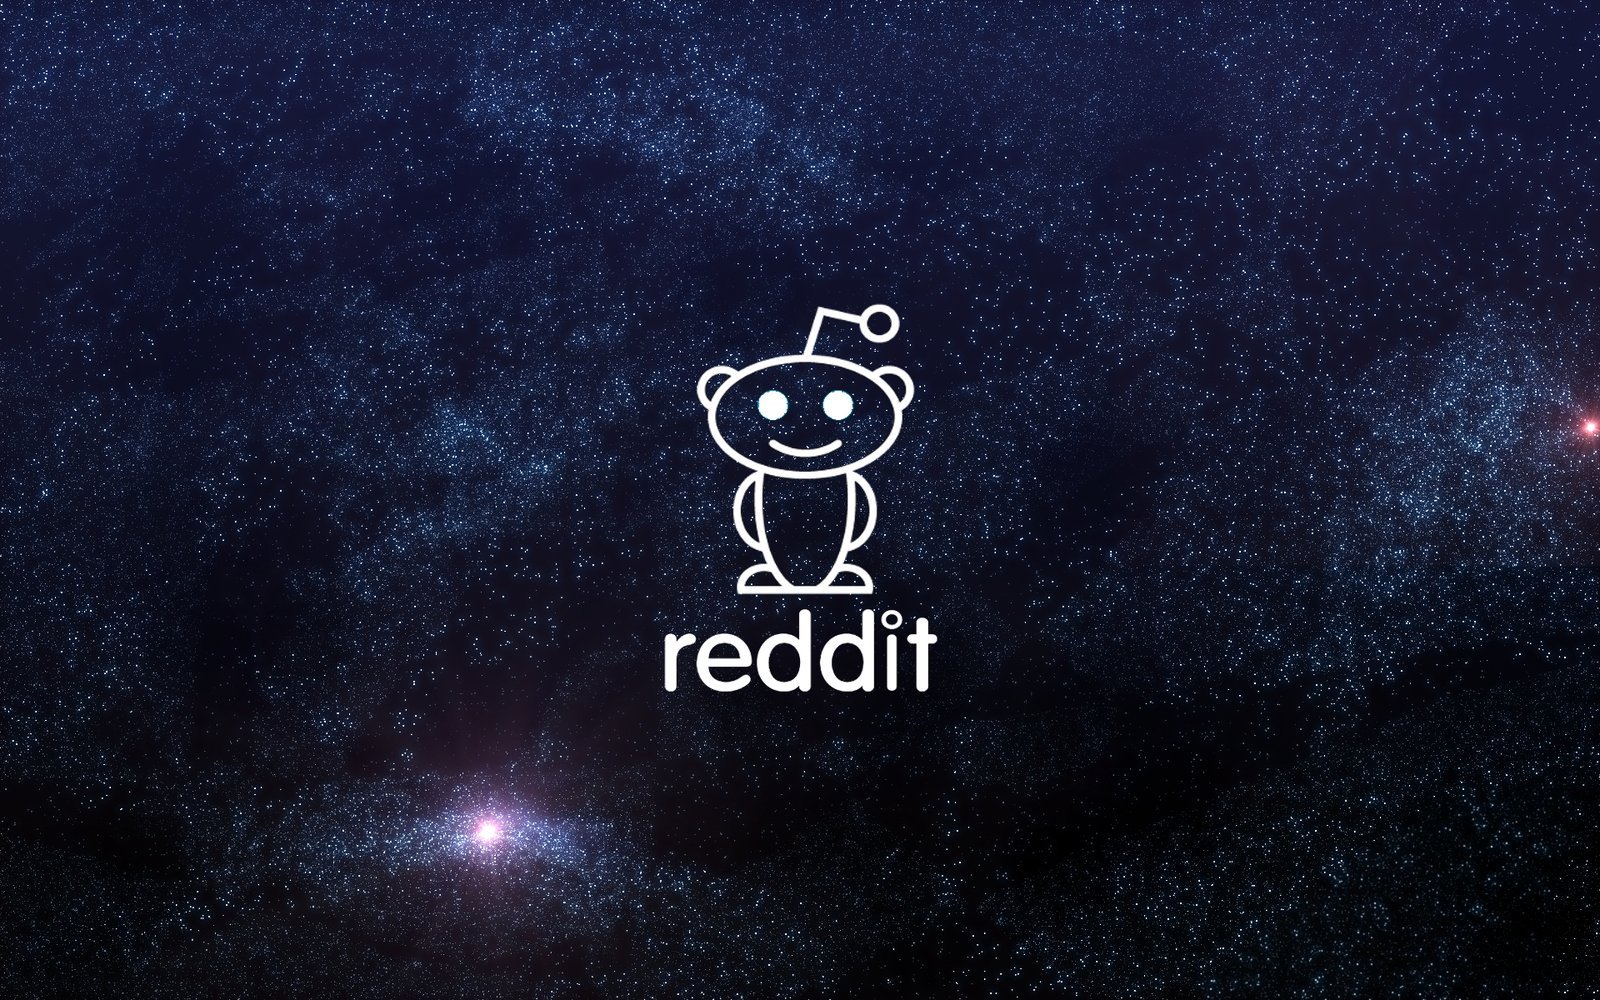 Reddit Wallpaper Changer can scrape Reddit for wallpapers and display them based on numerous available settings. Video tutorial available.